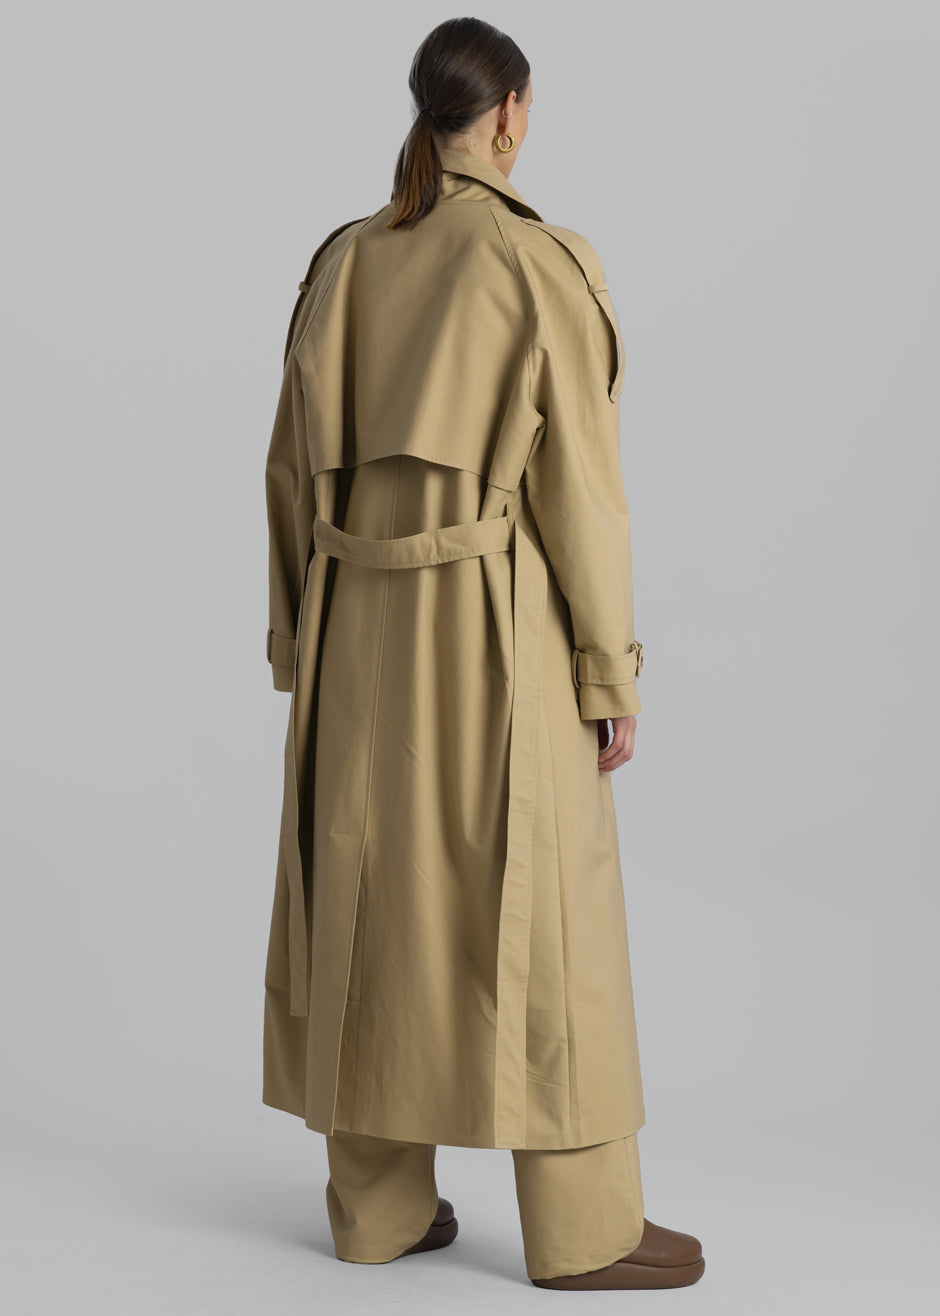 Suzanne Trench Coat - Beige - 9